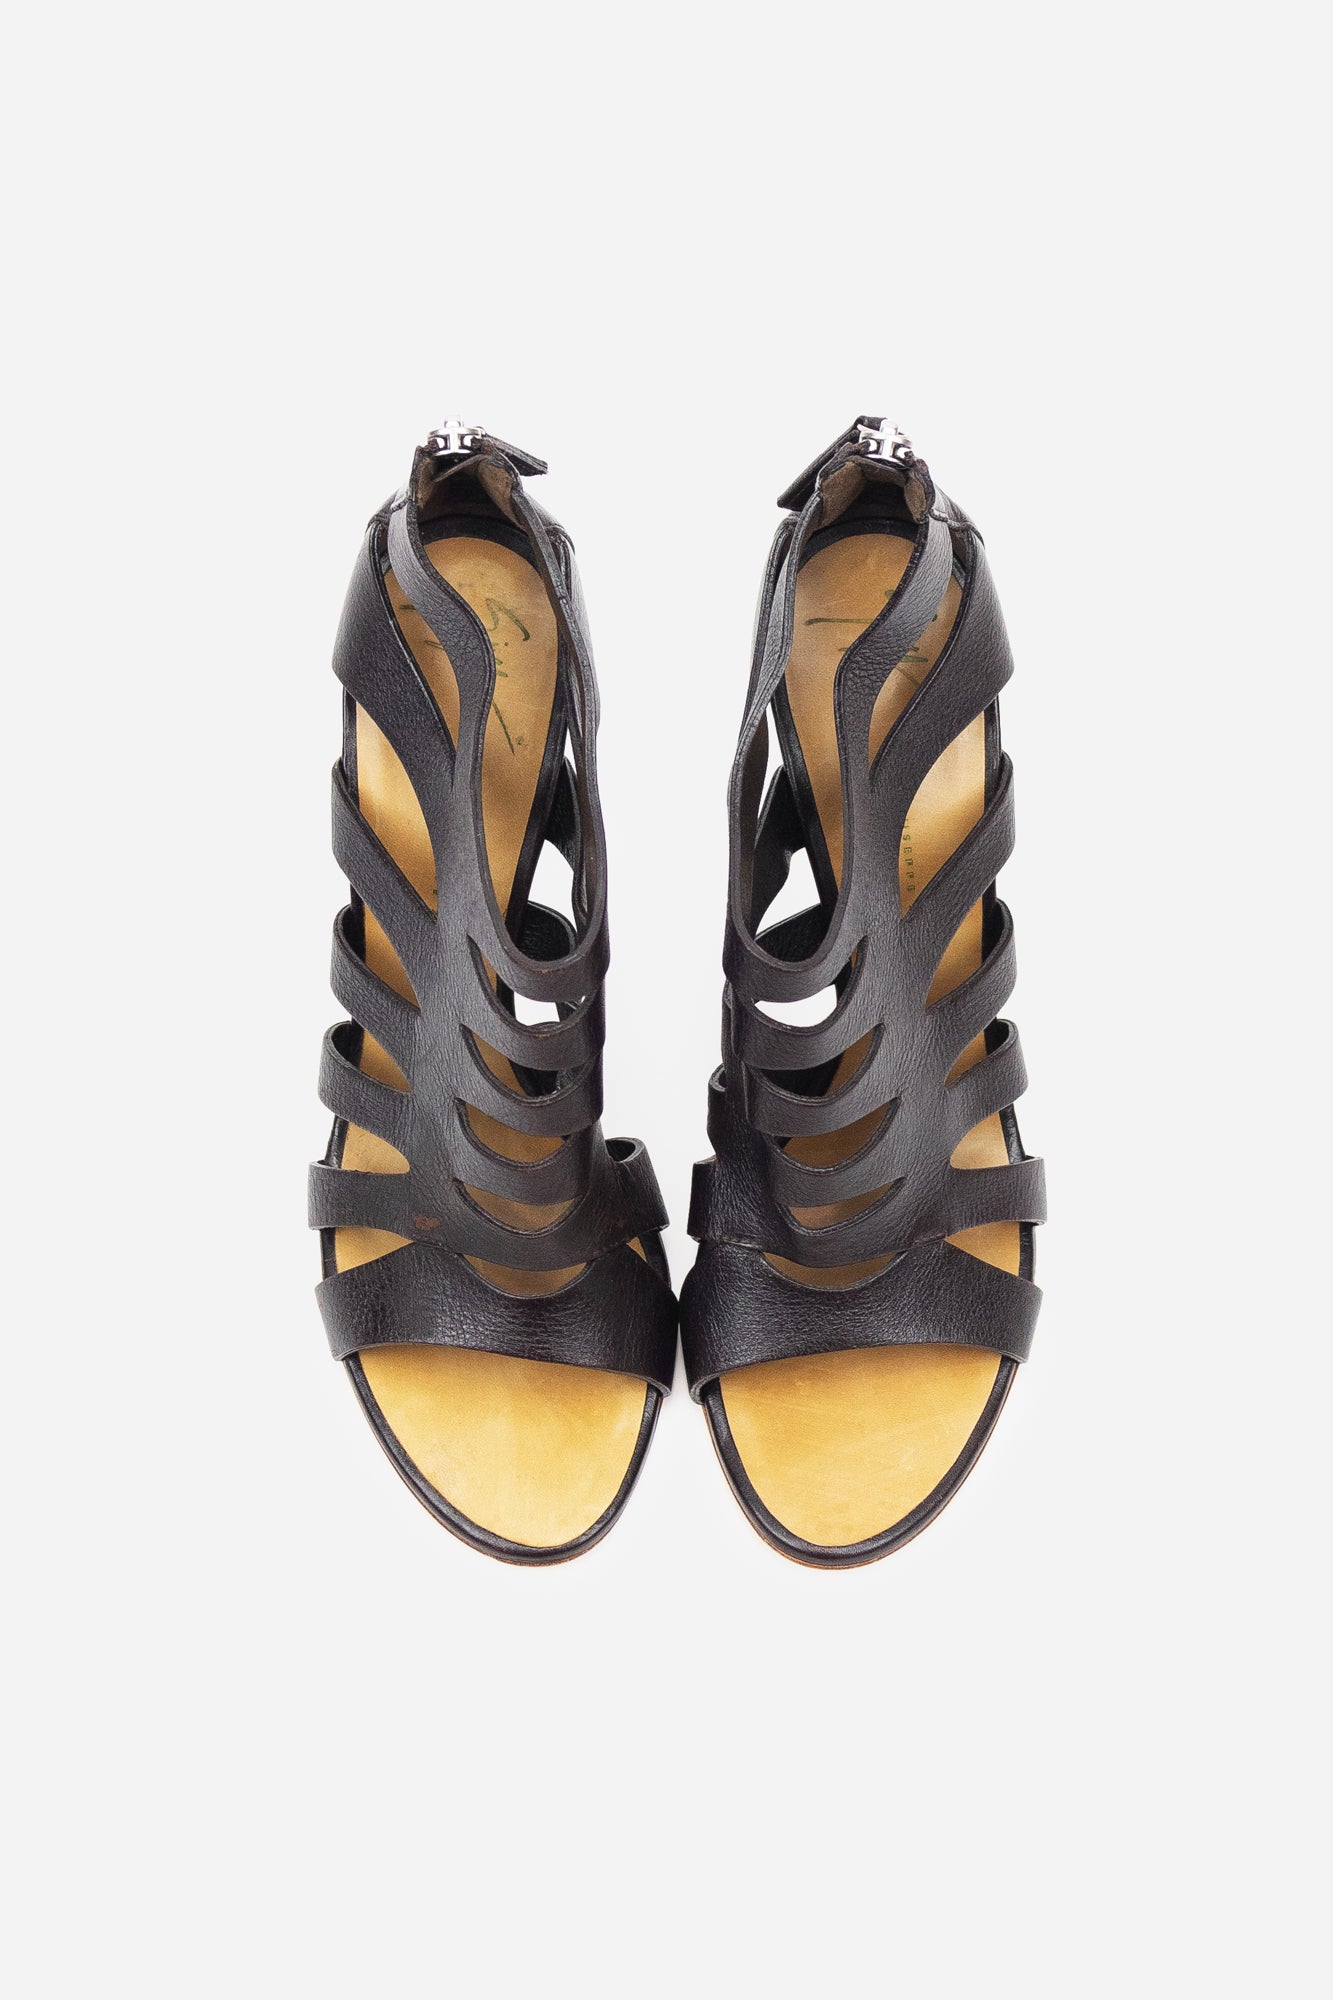 Dark Brown Leather Cut-Out Heeled Sandals